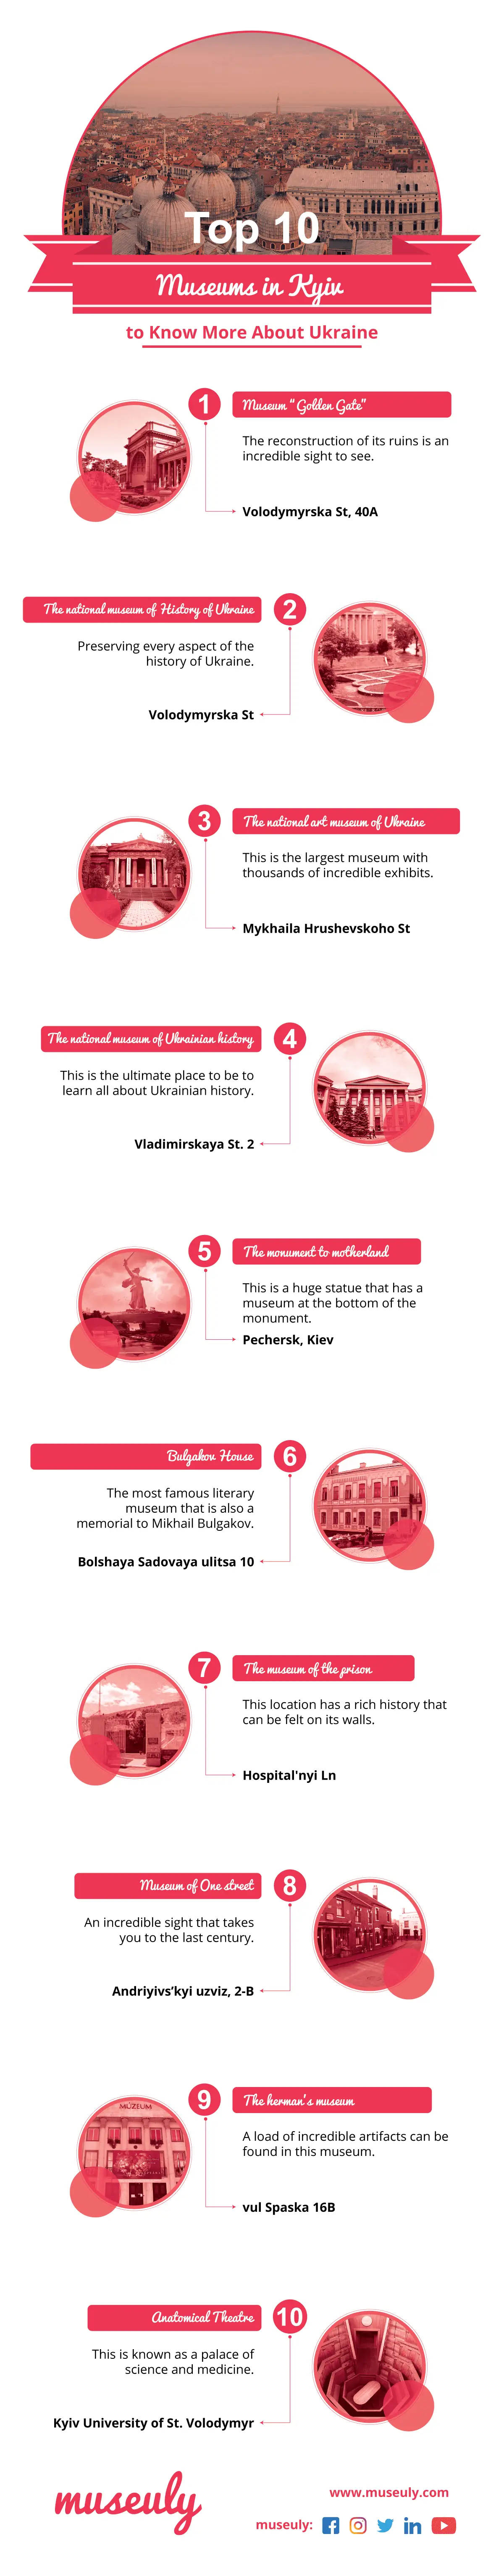 Infographic - top museums in Kyiv